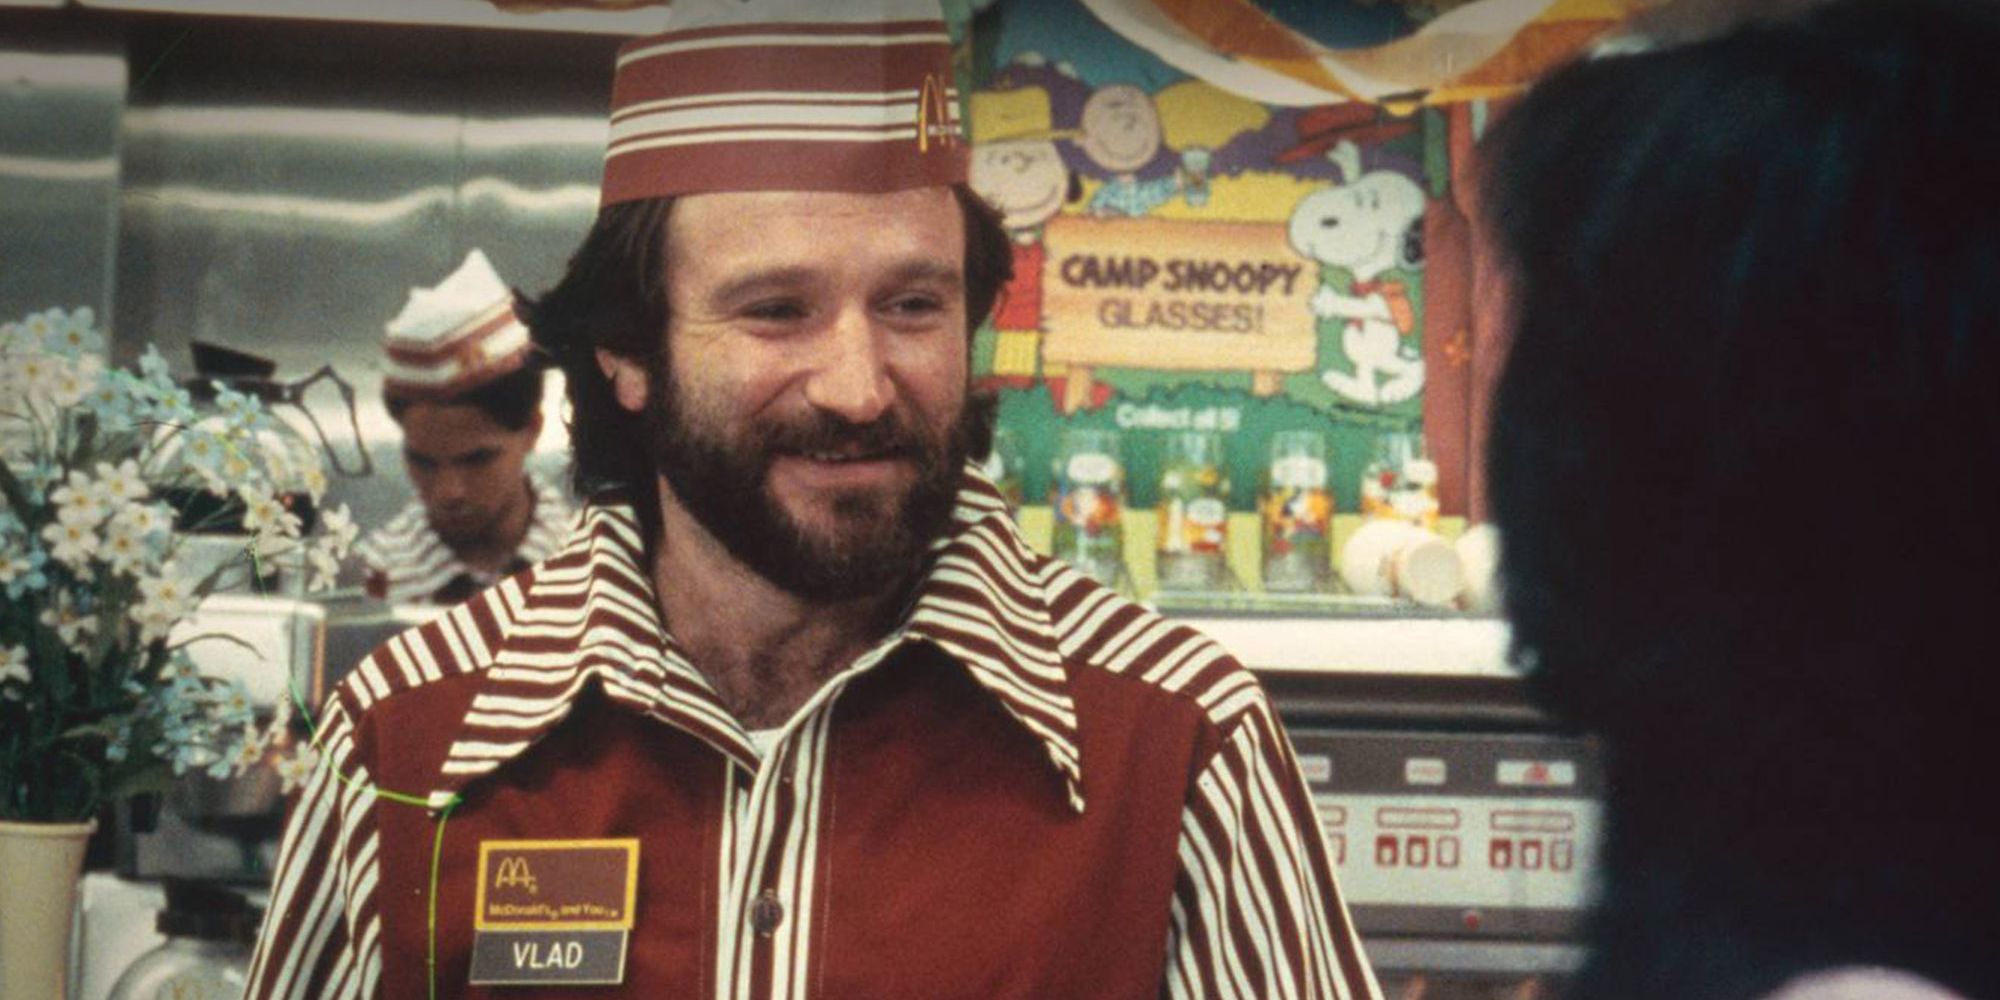 Robin Williams as Vlad working at McDonalds in Moscow on the Hudson